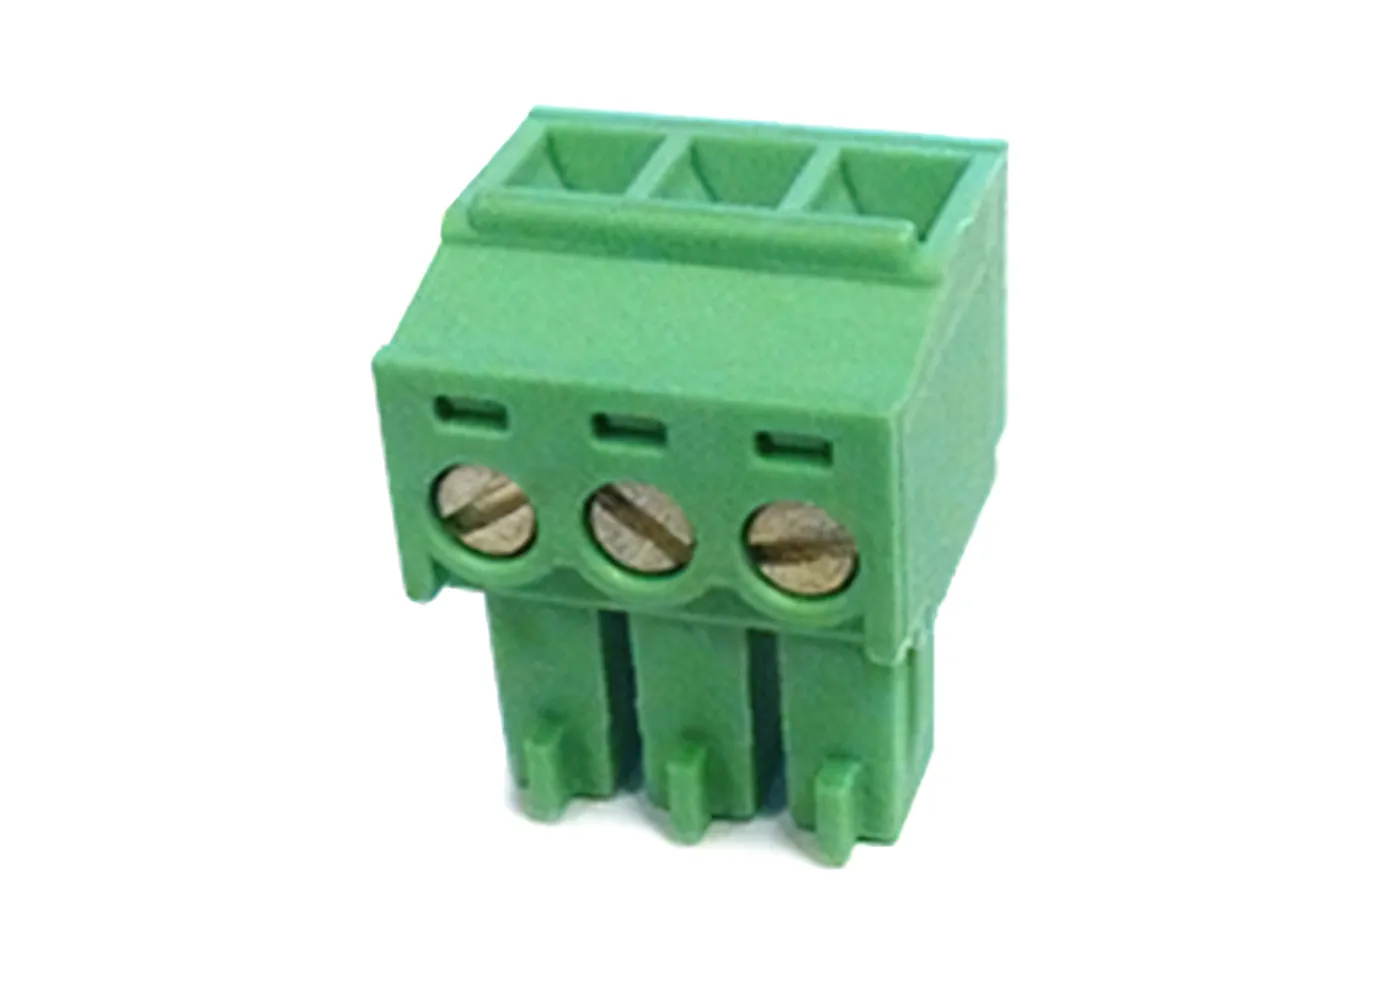 Input Power Connector<br/>

<span class="clsSpnProdMdls">For MLE Series, MLC Series only</span>